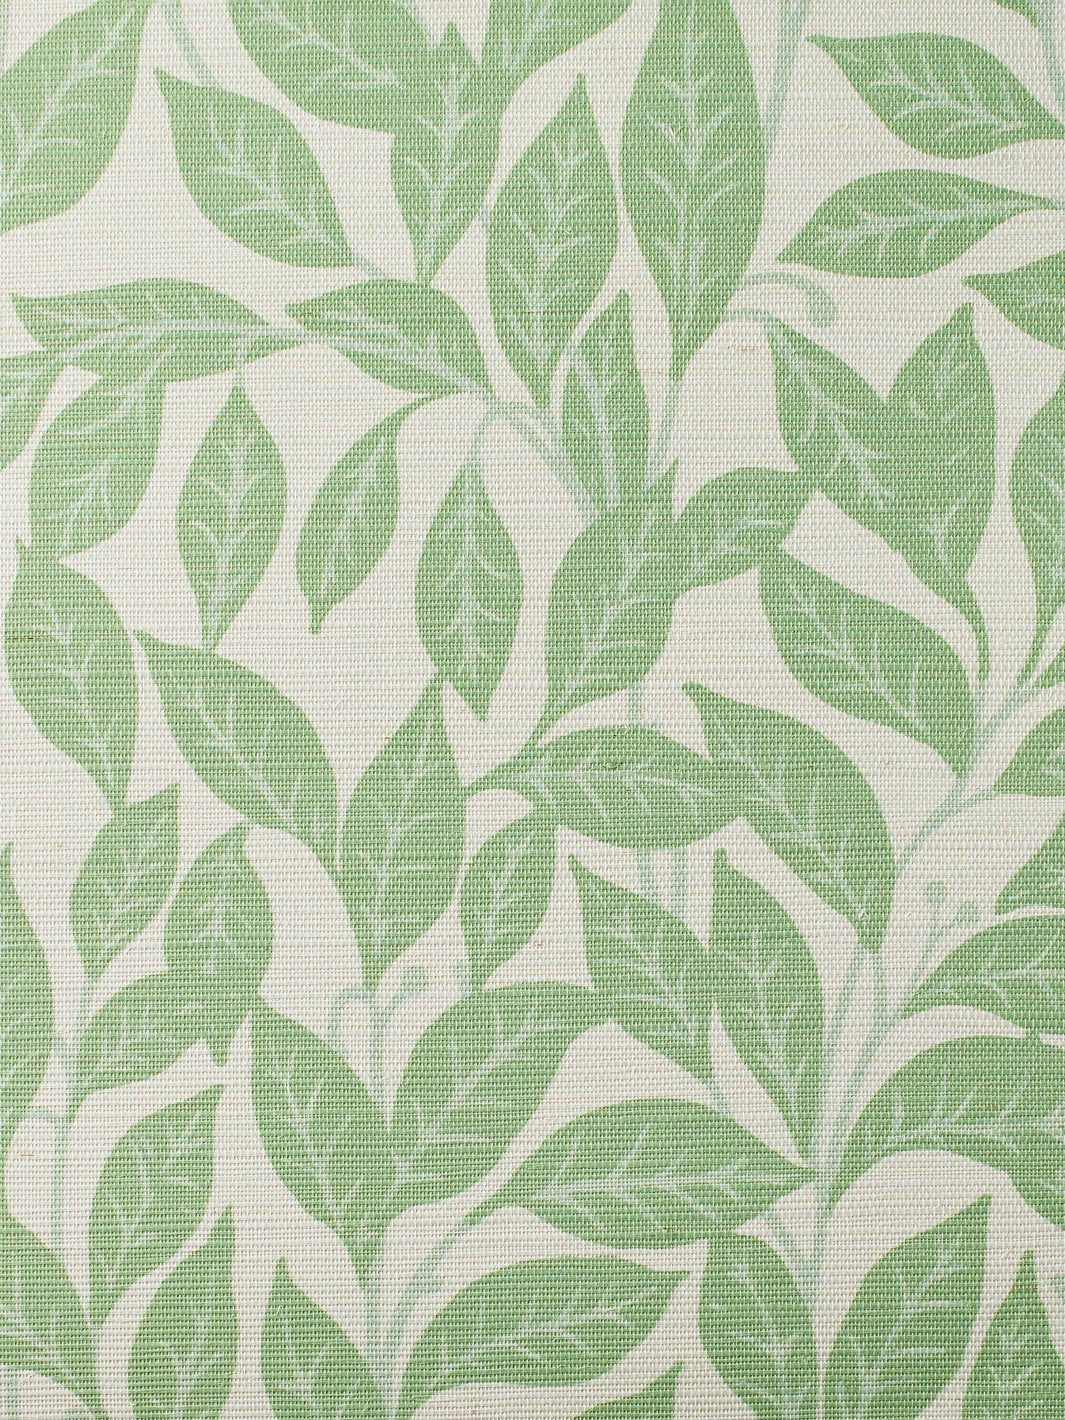 'Orchard Leaves' Grasscloth' Wallpaper by Wallshoppe - Spring Green